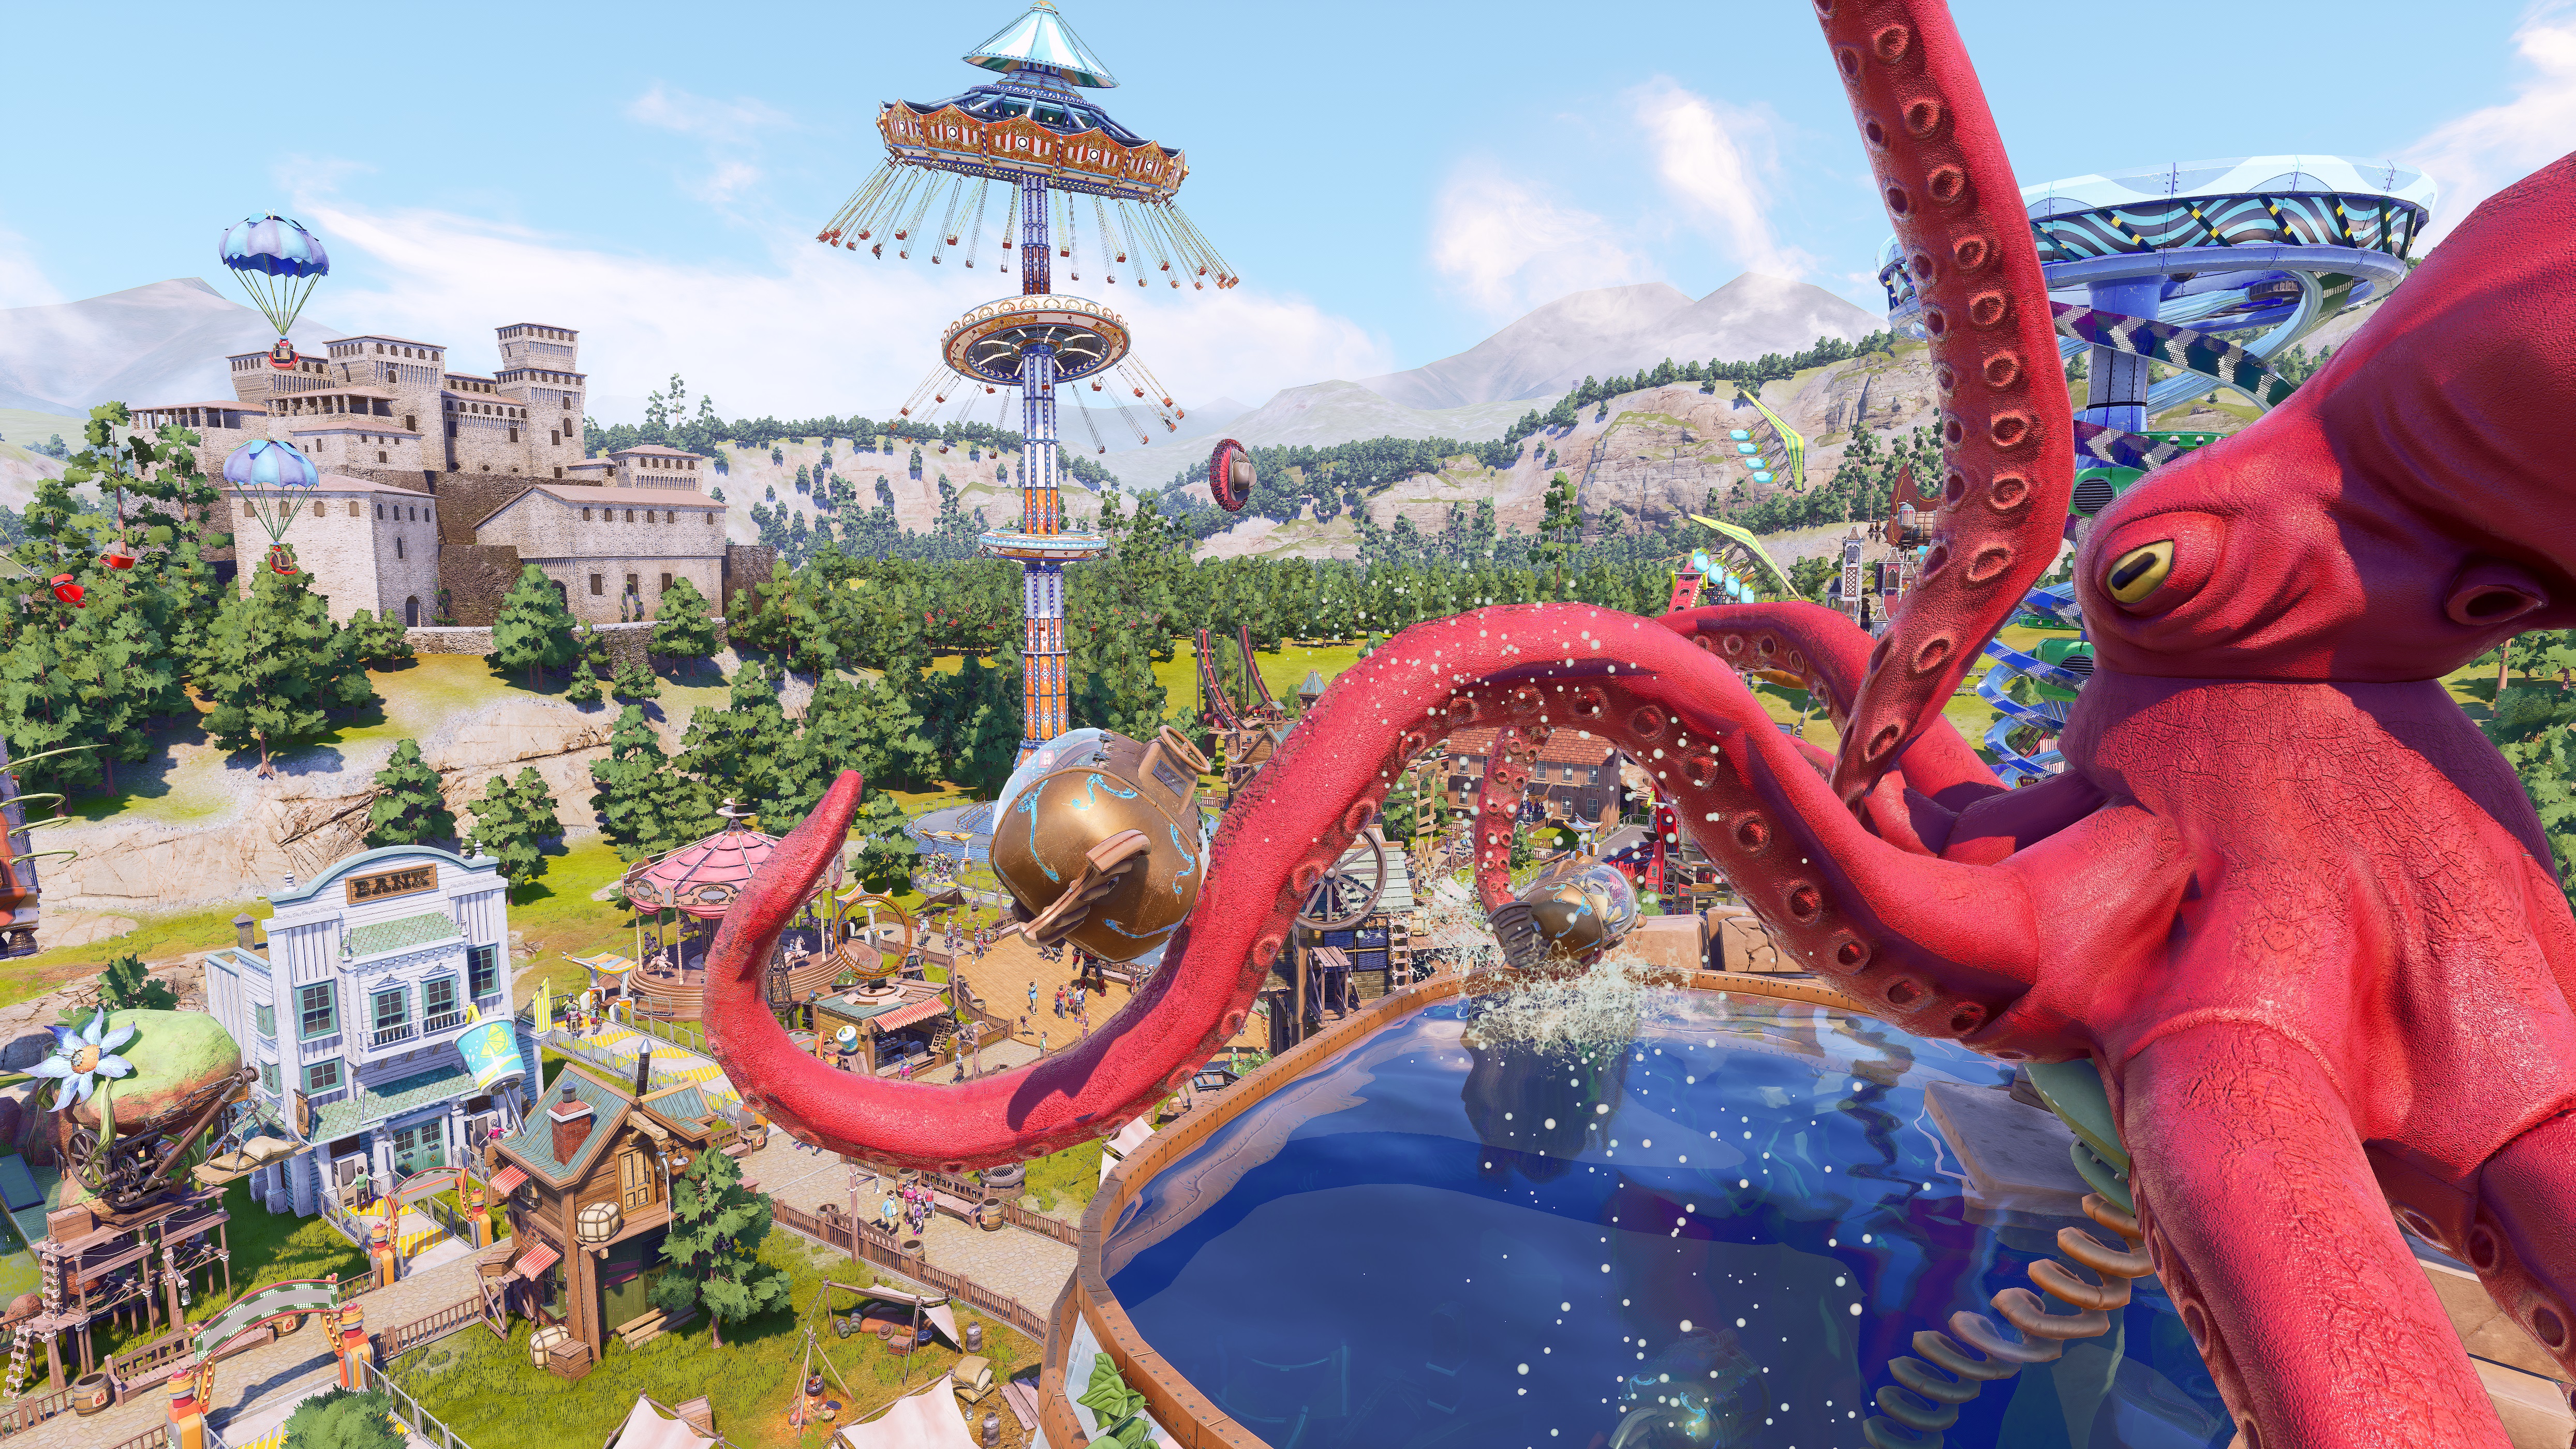 A ride featuring a giant animatronic octopus